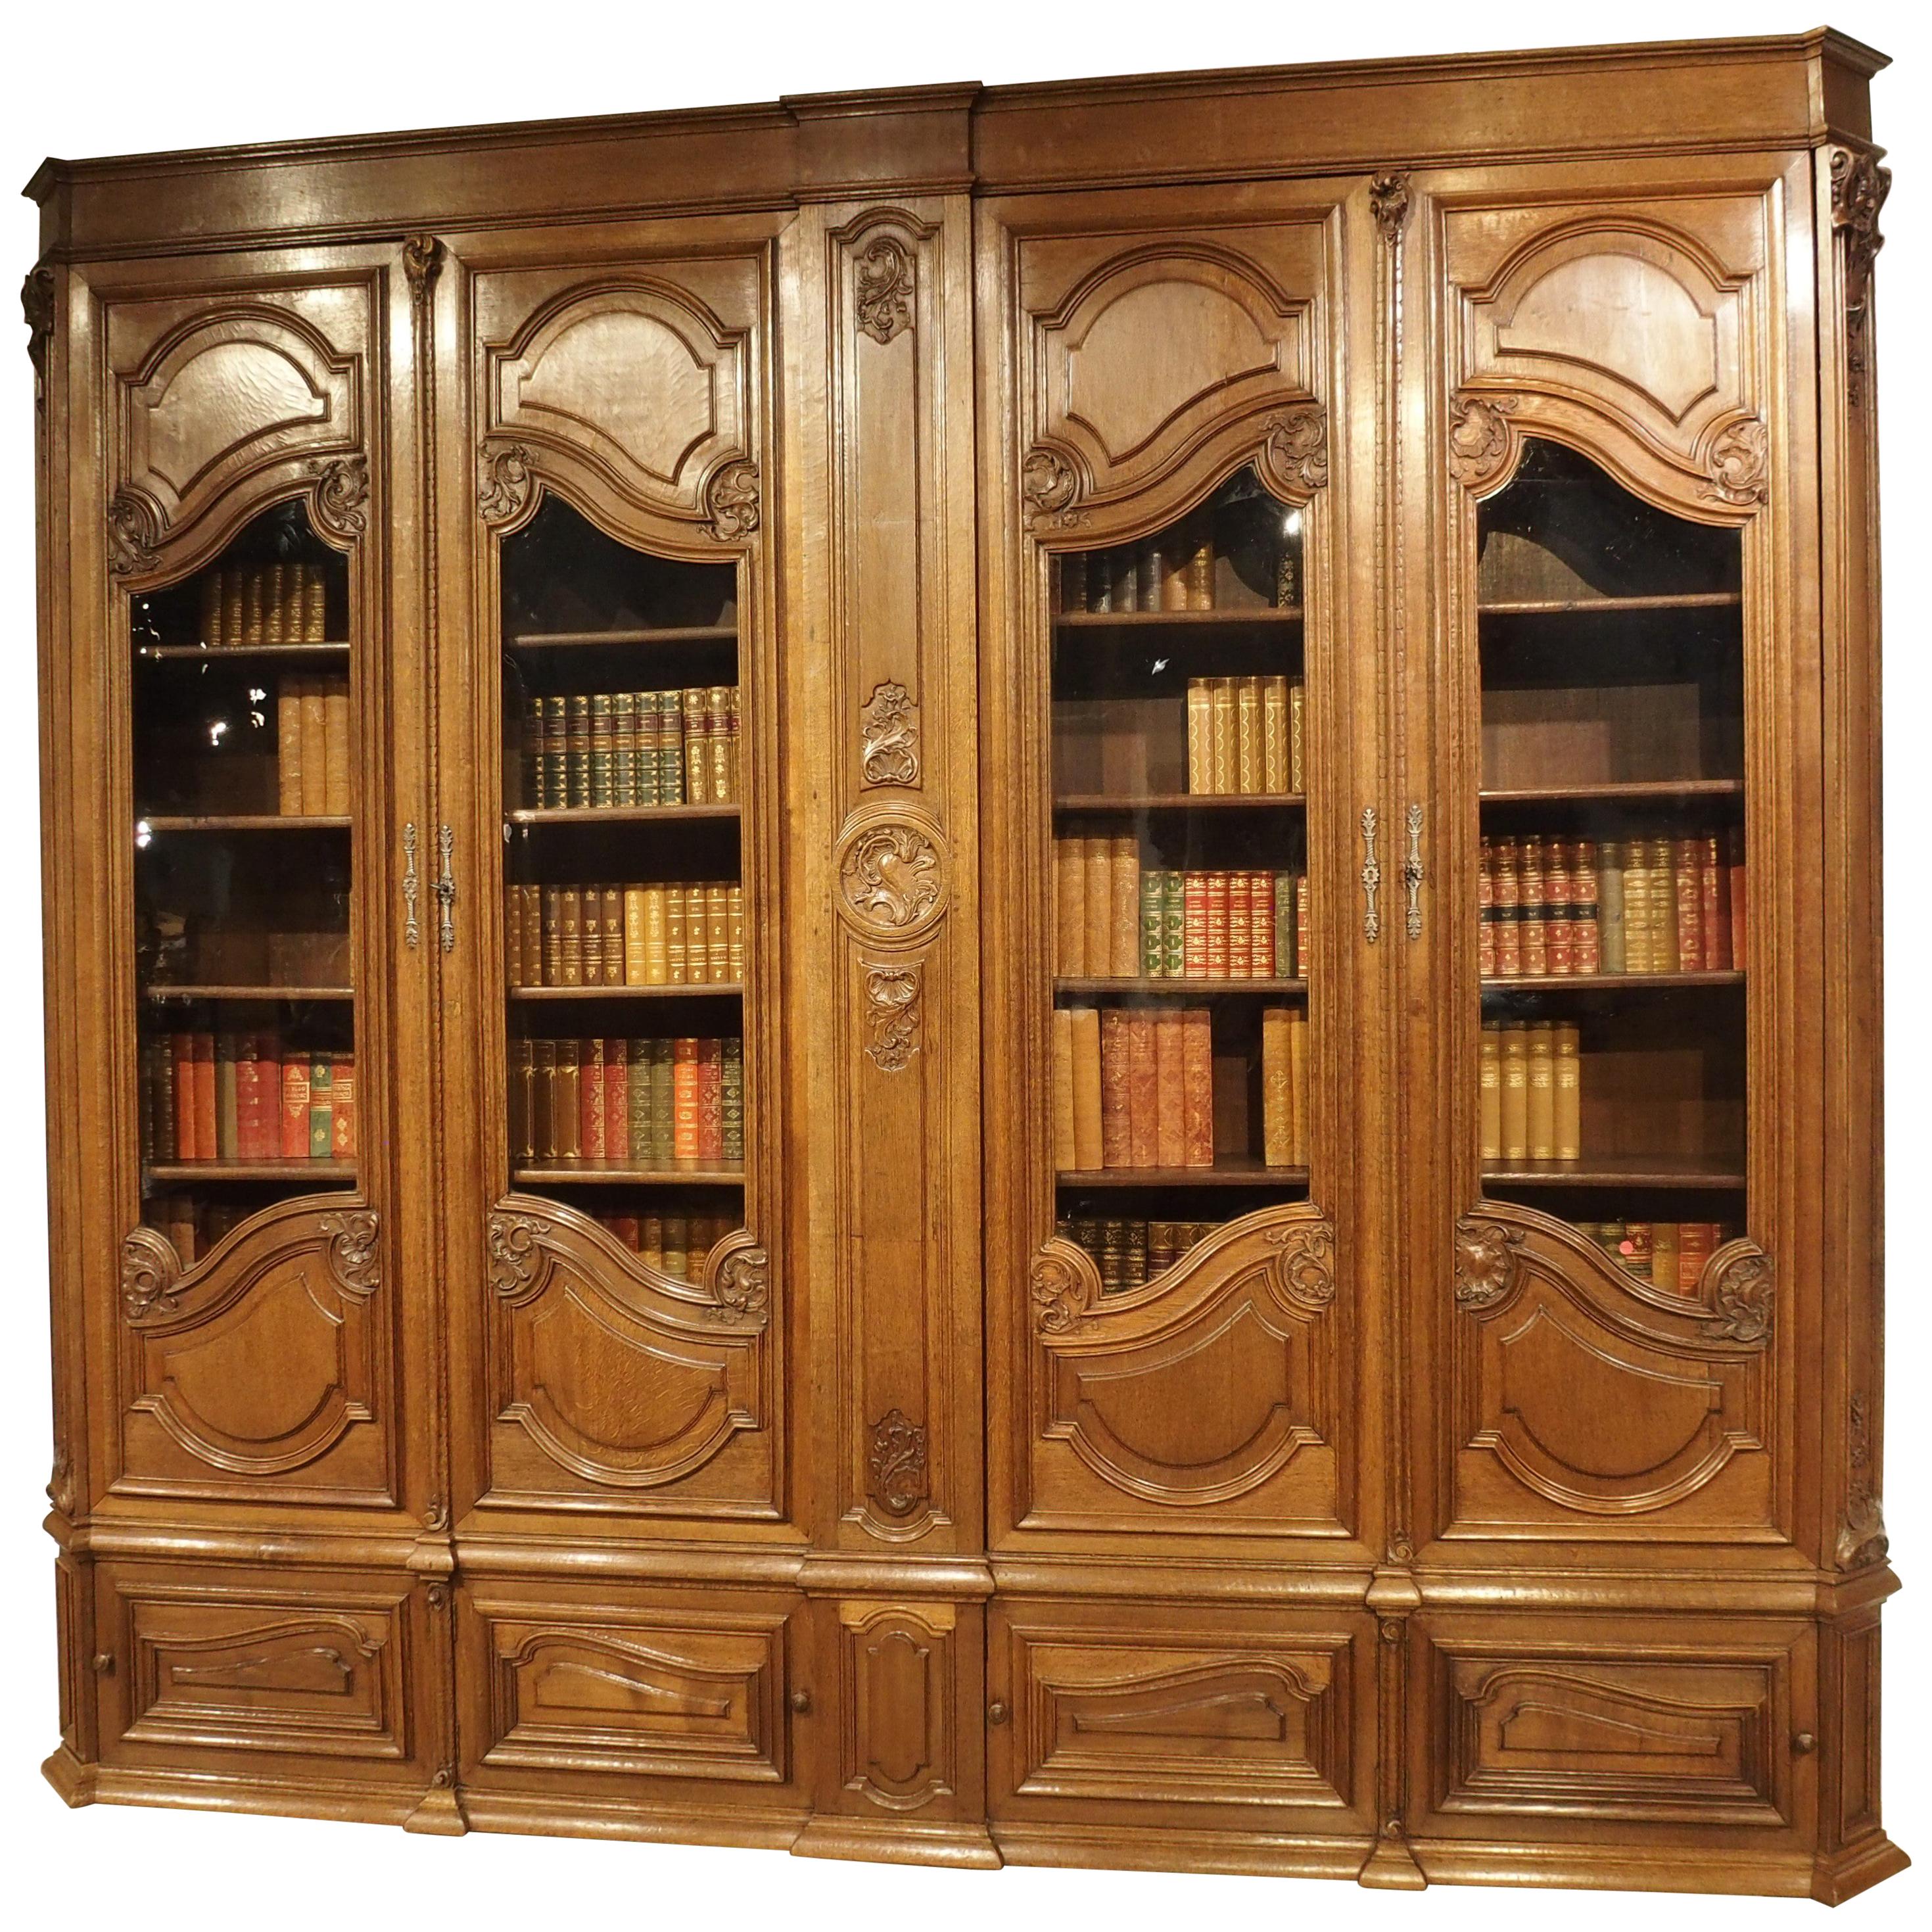 Antique French Oak Regence Style Bibliotheque, circa 1860